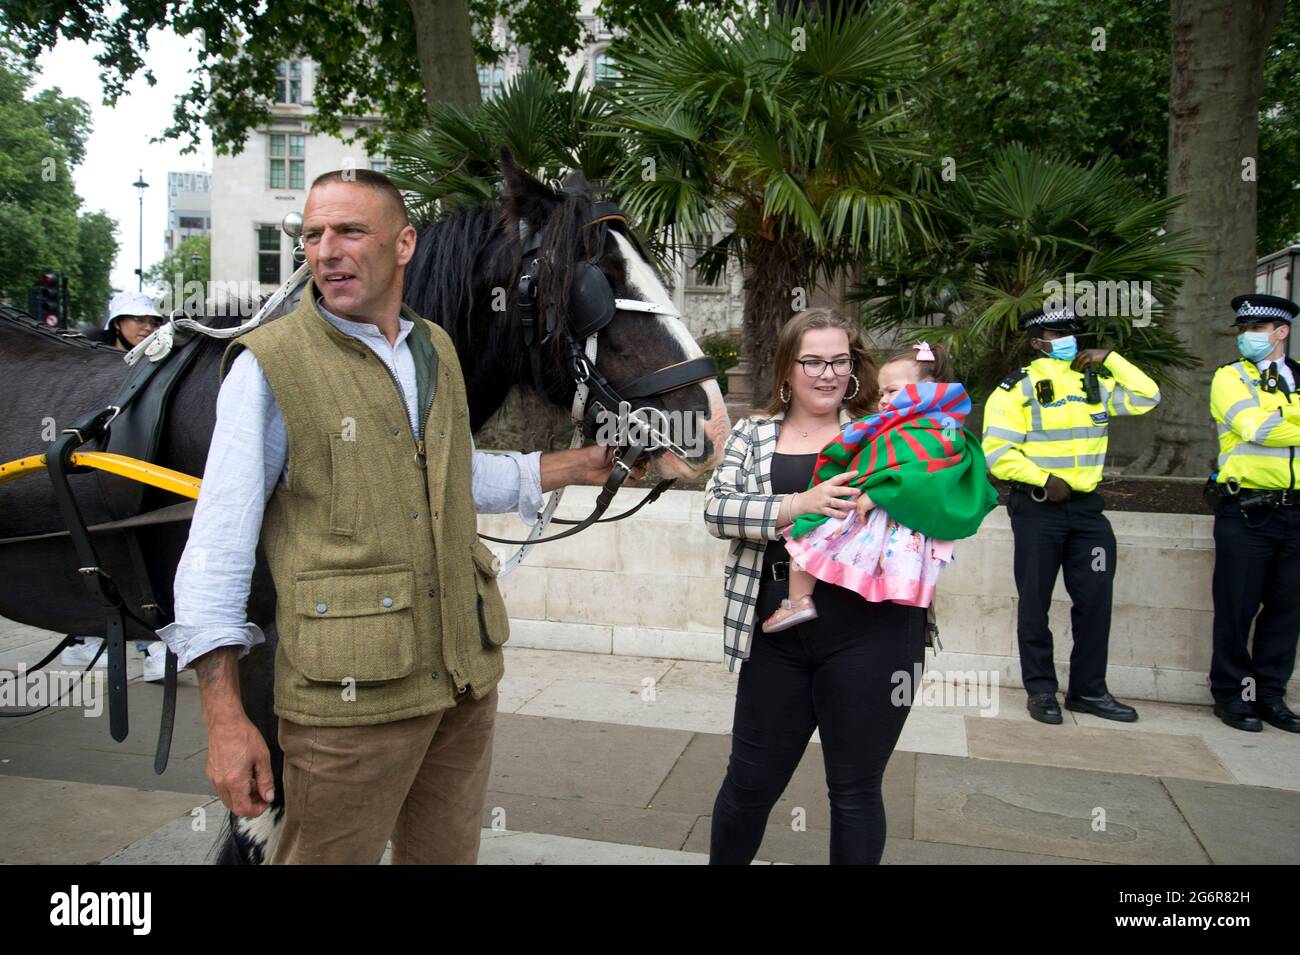 Kill the Bill. Gypsy, Roma and traveller communities protest in Parliament Square against the new policing bill before Parliament. Stock Photo